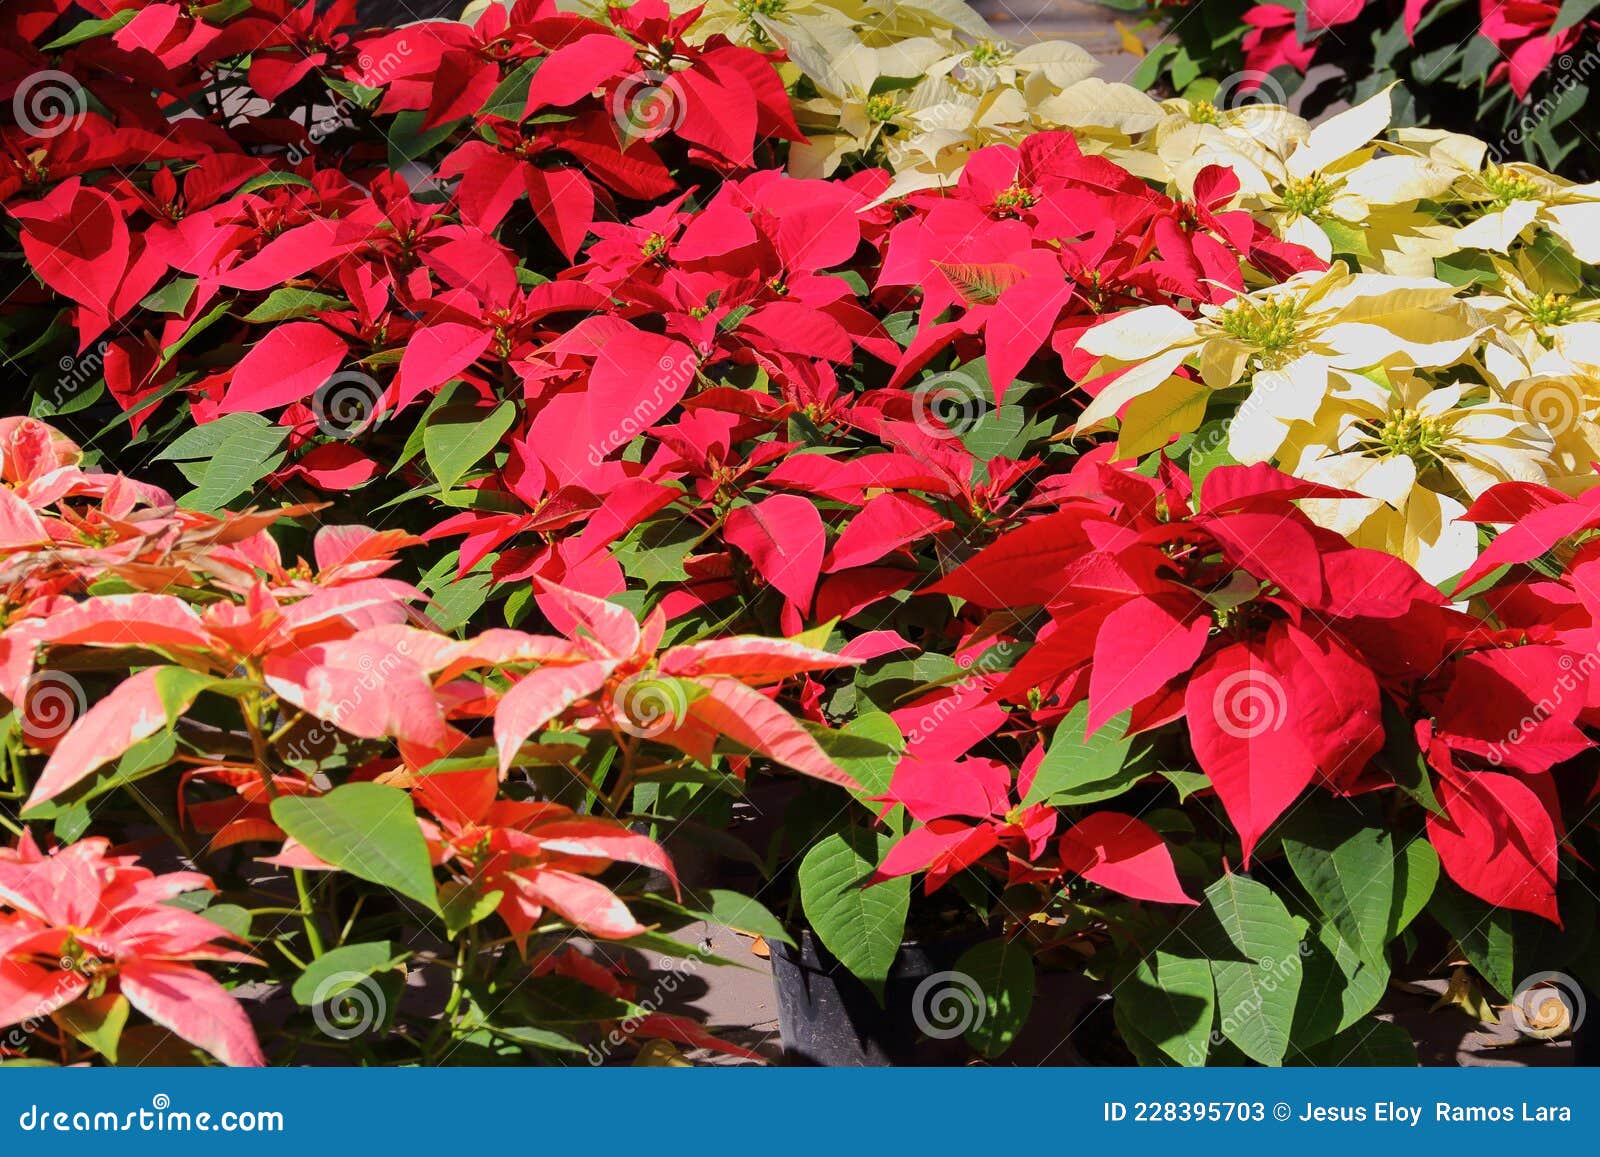 noche buena or poinsettia flowers in tlaxcala city.  i